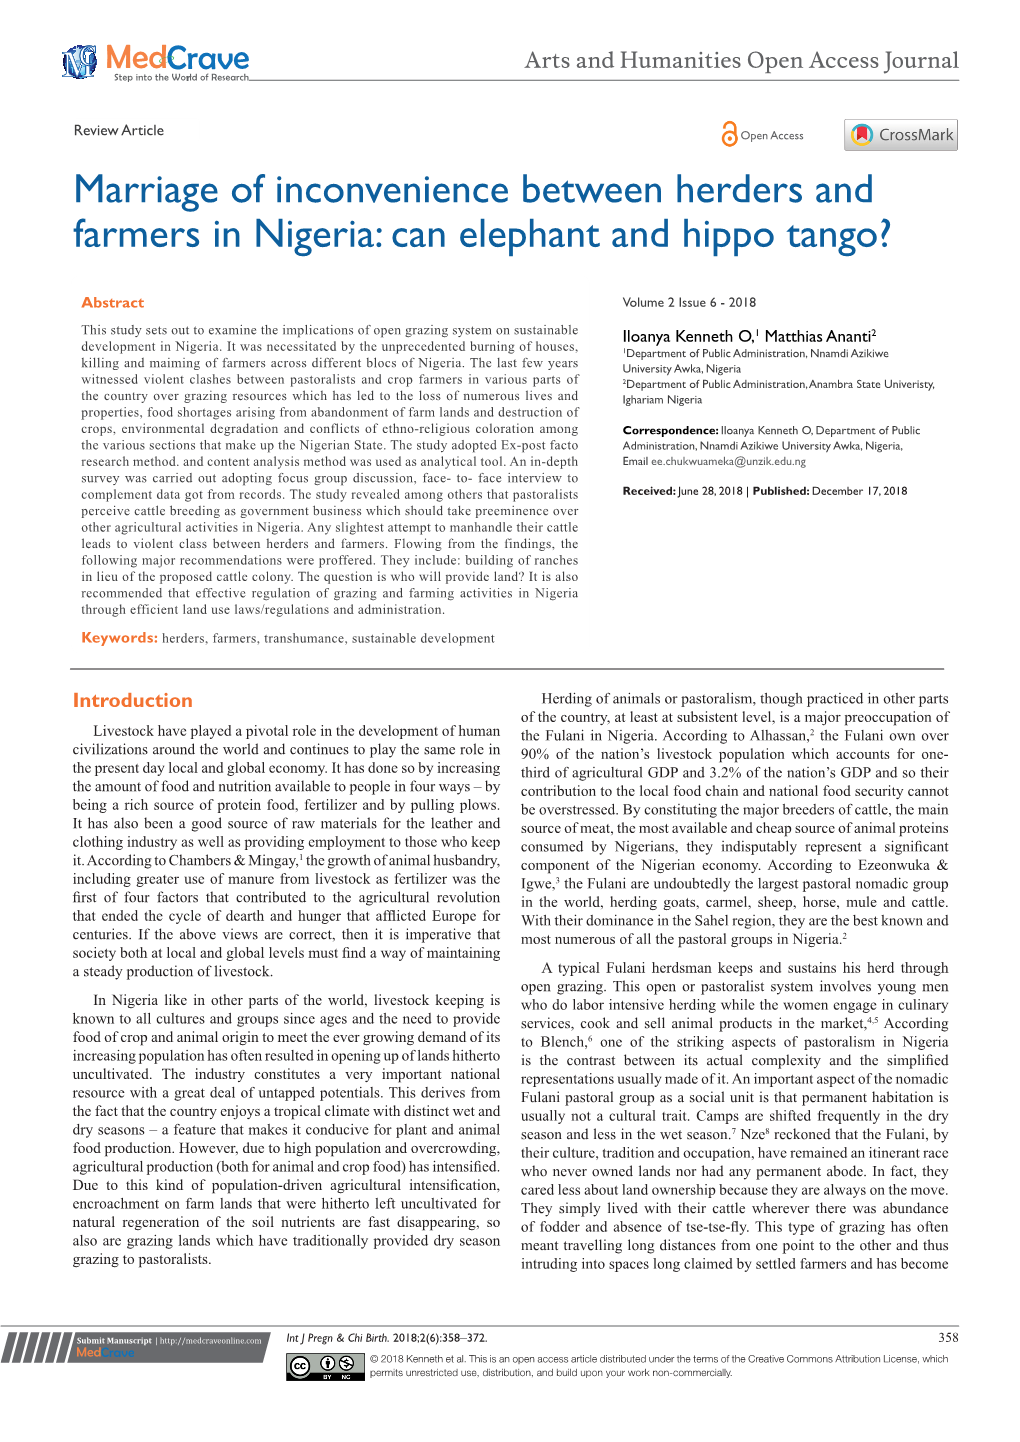 Marriage of Inconvenience Between Herders and Farmers in Nigeria: Can Elephant and Hippo Tango?